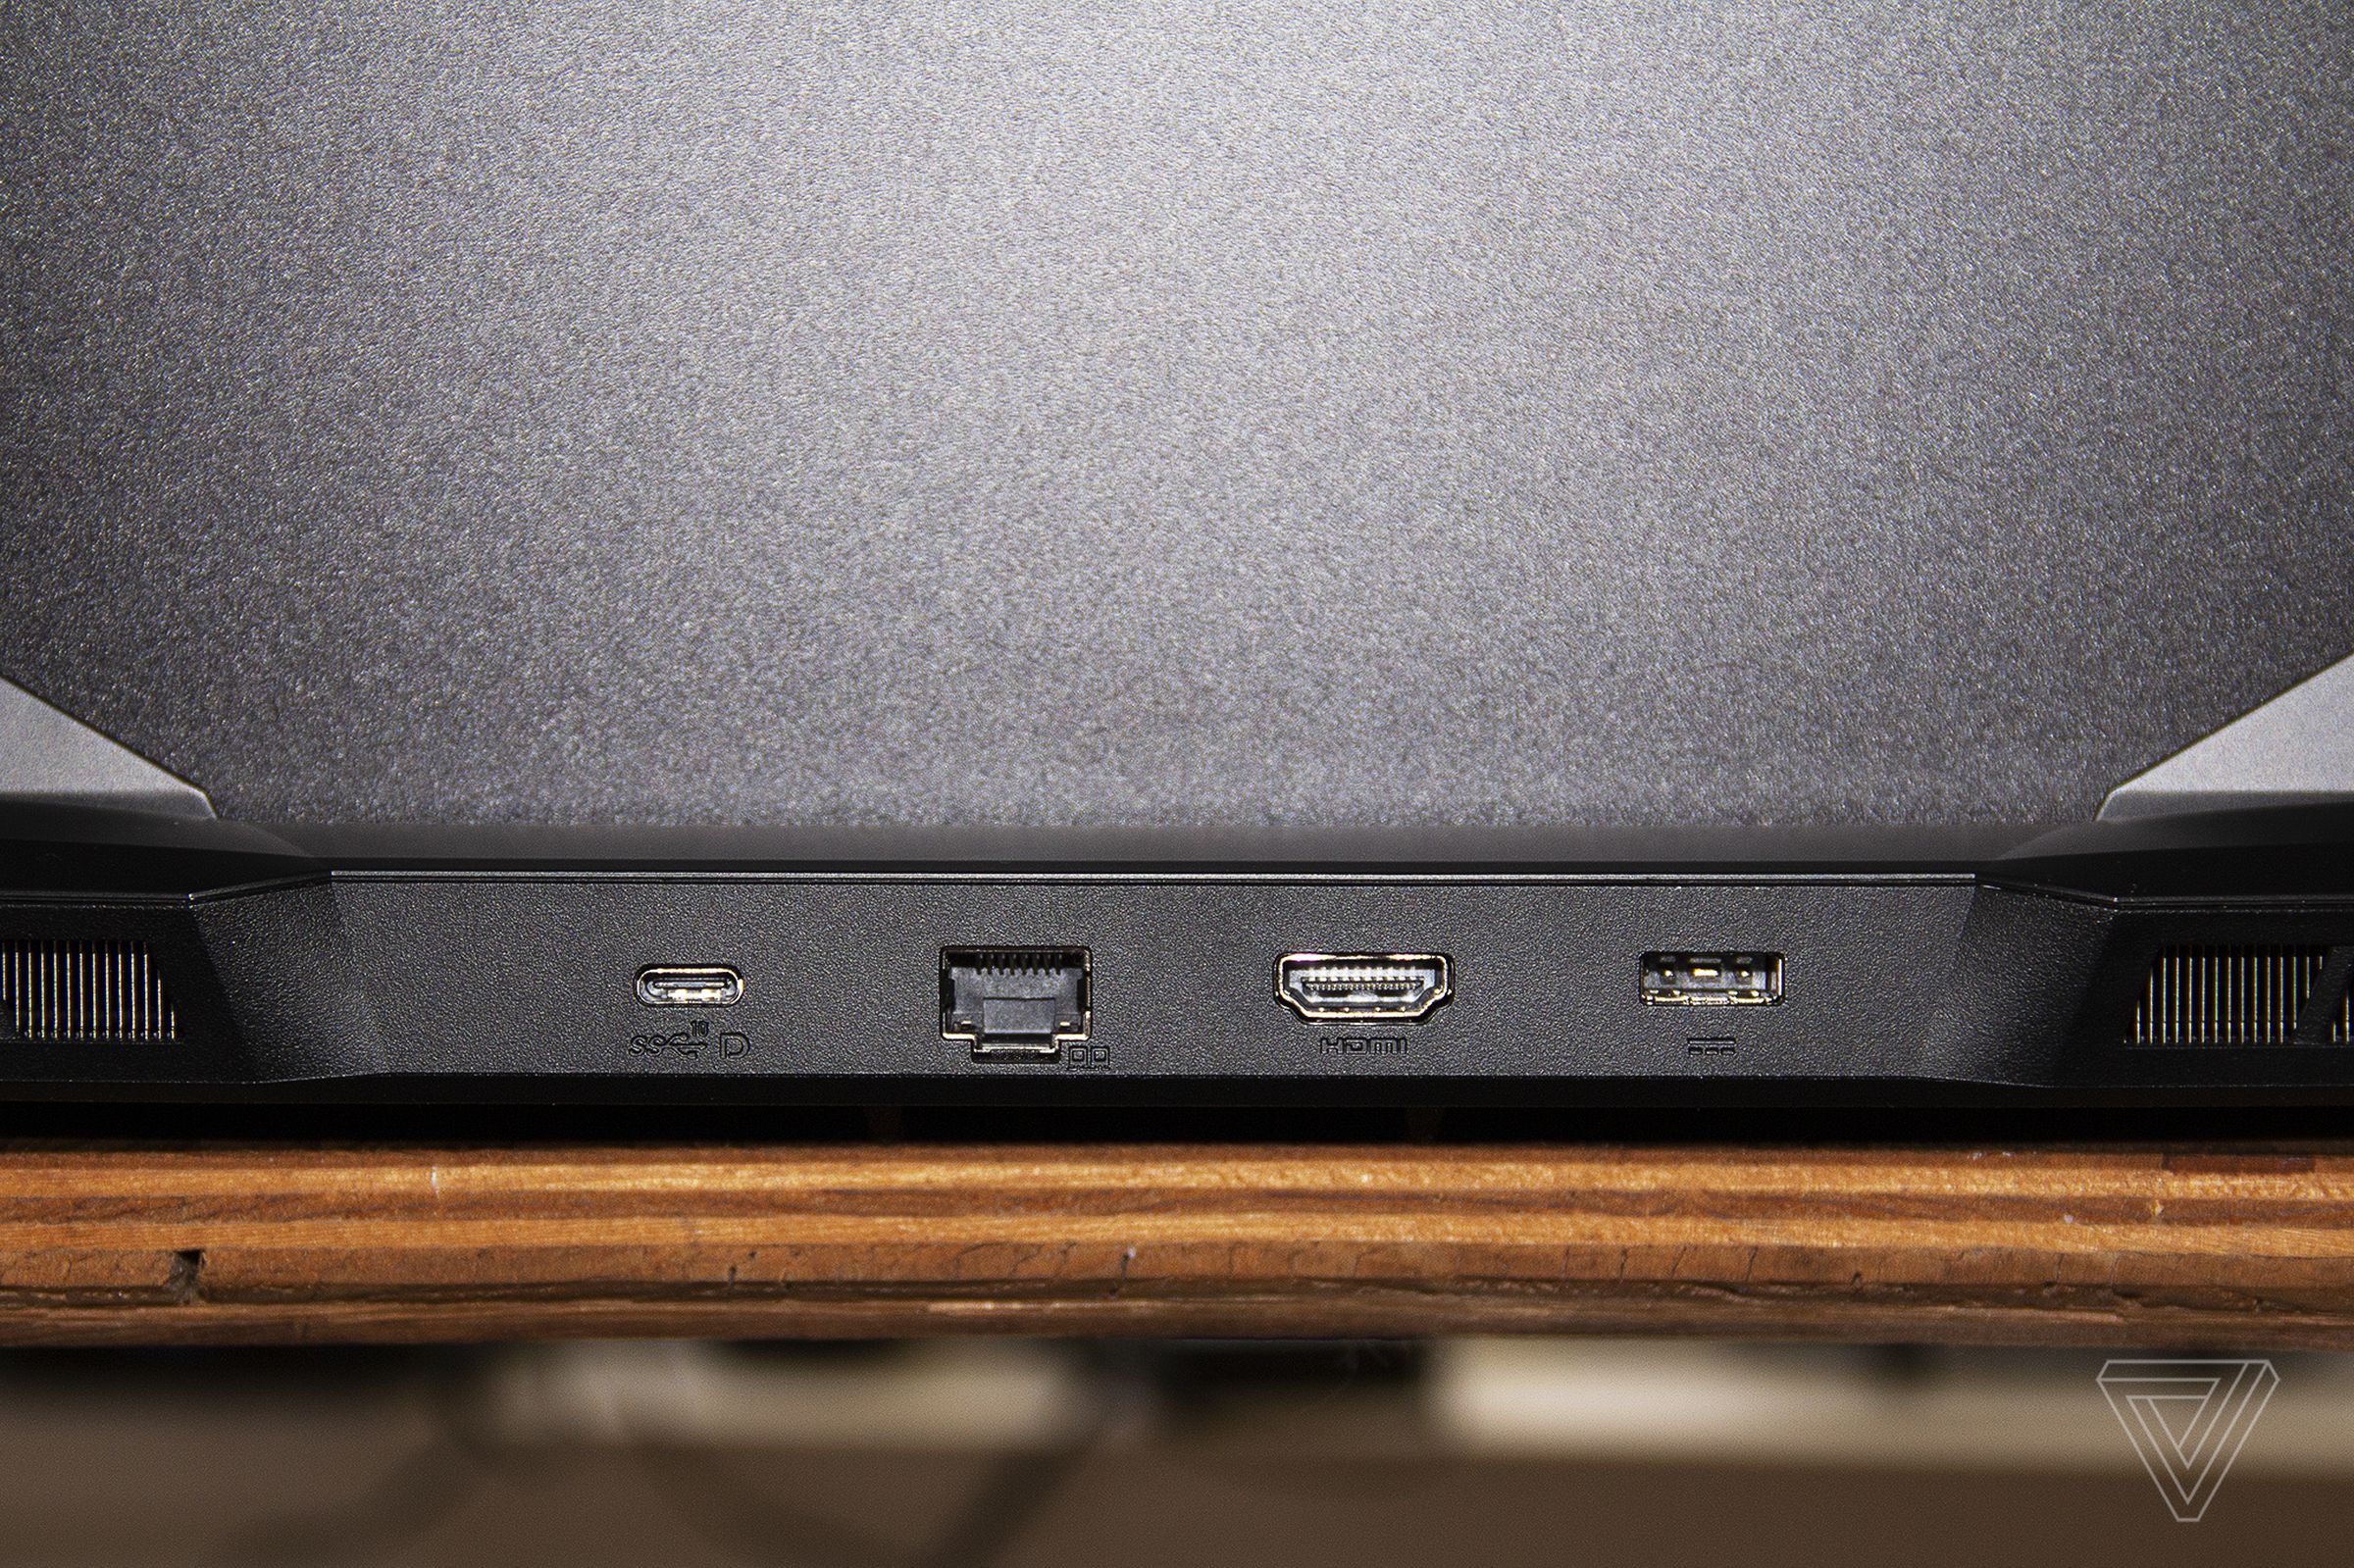 The ports in the back of the MSI GP66 Leopard, close  up.